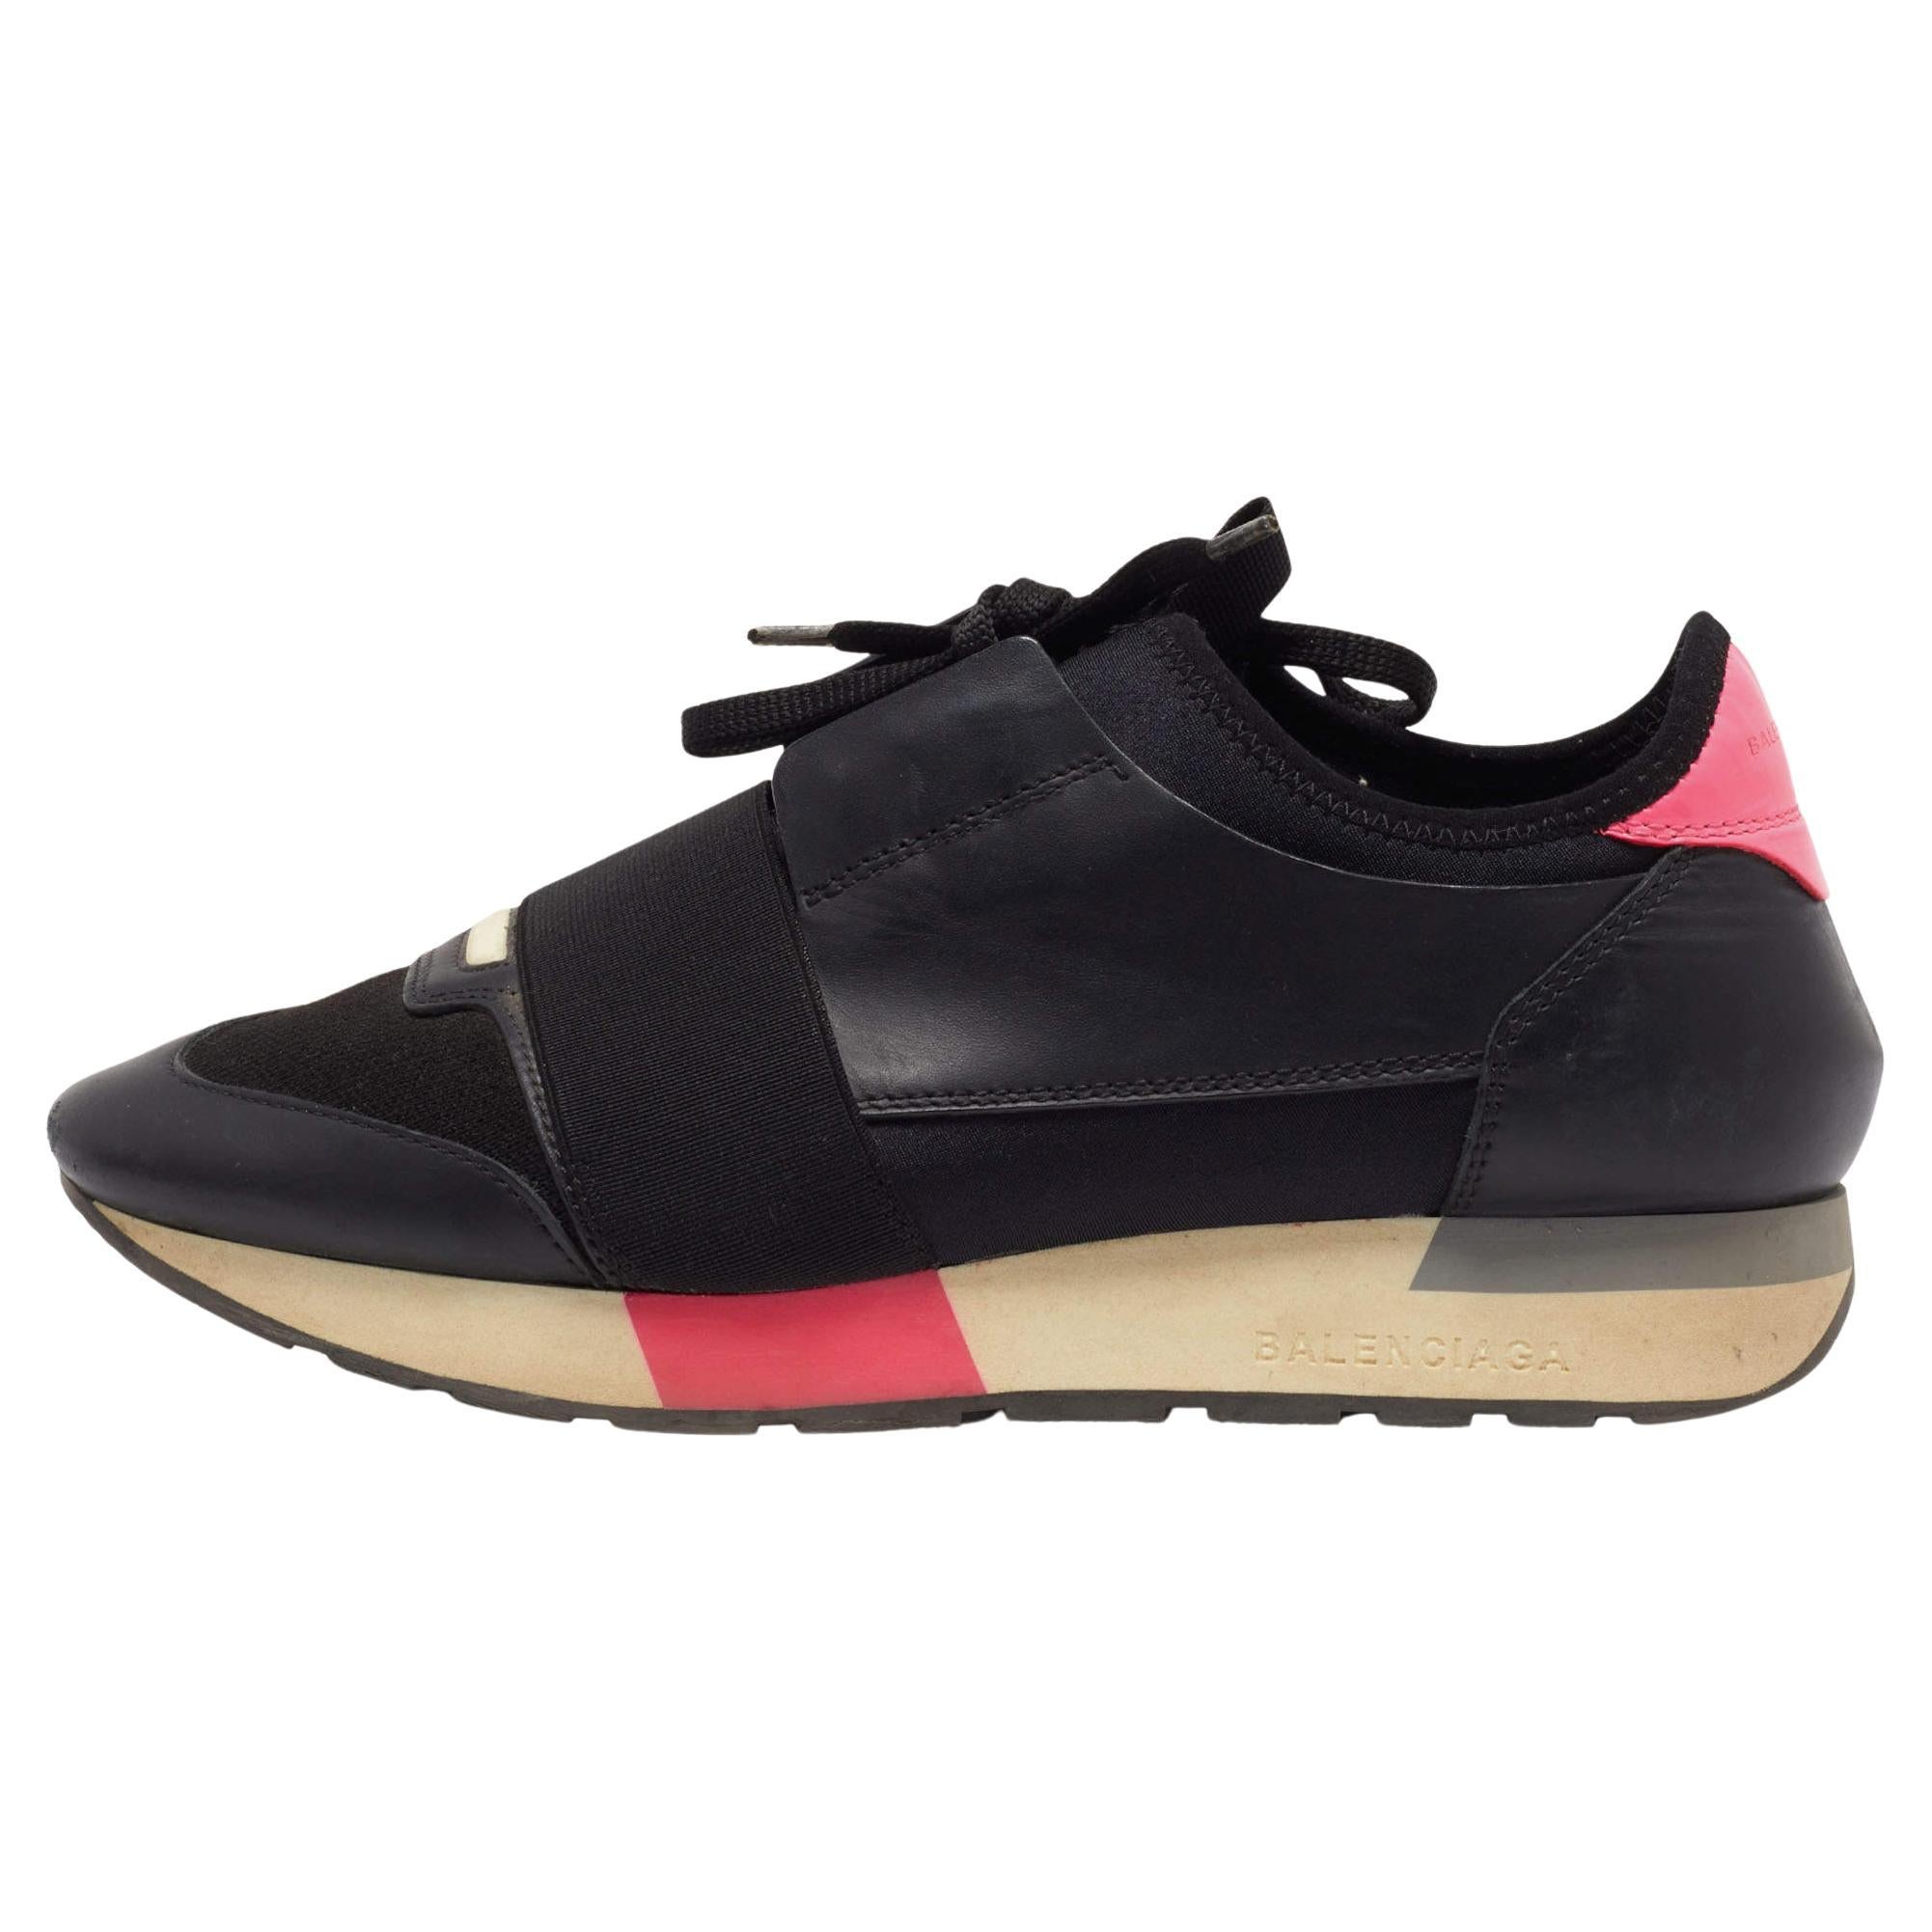 Balenciaga Black/Pink Leather and Fabric Race Runner Sneakers Size 38 For Sale